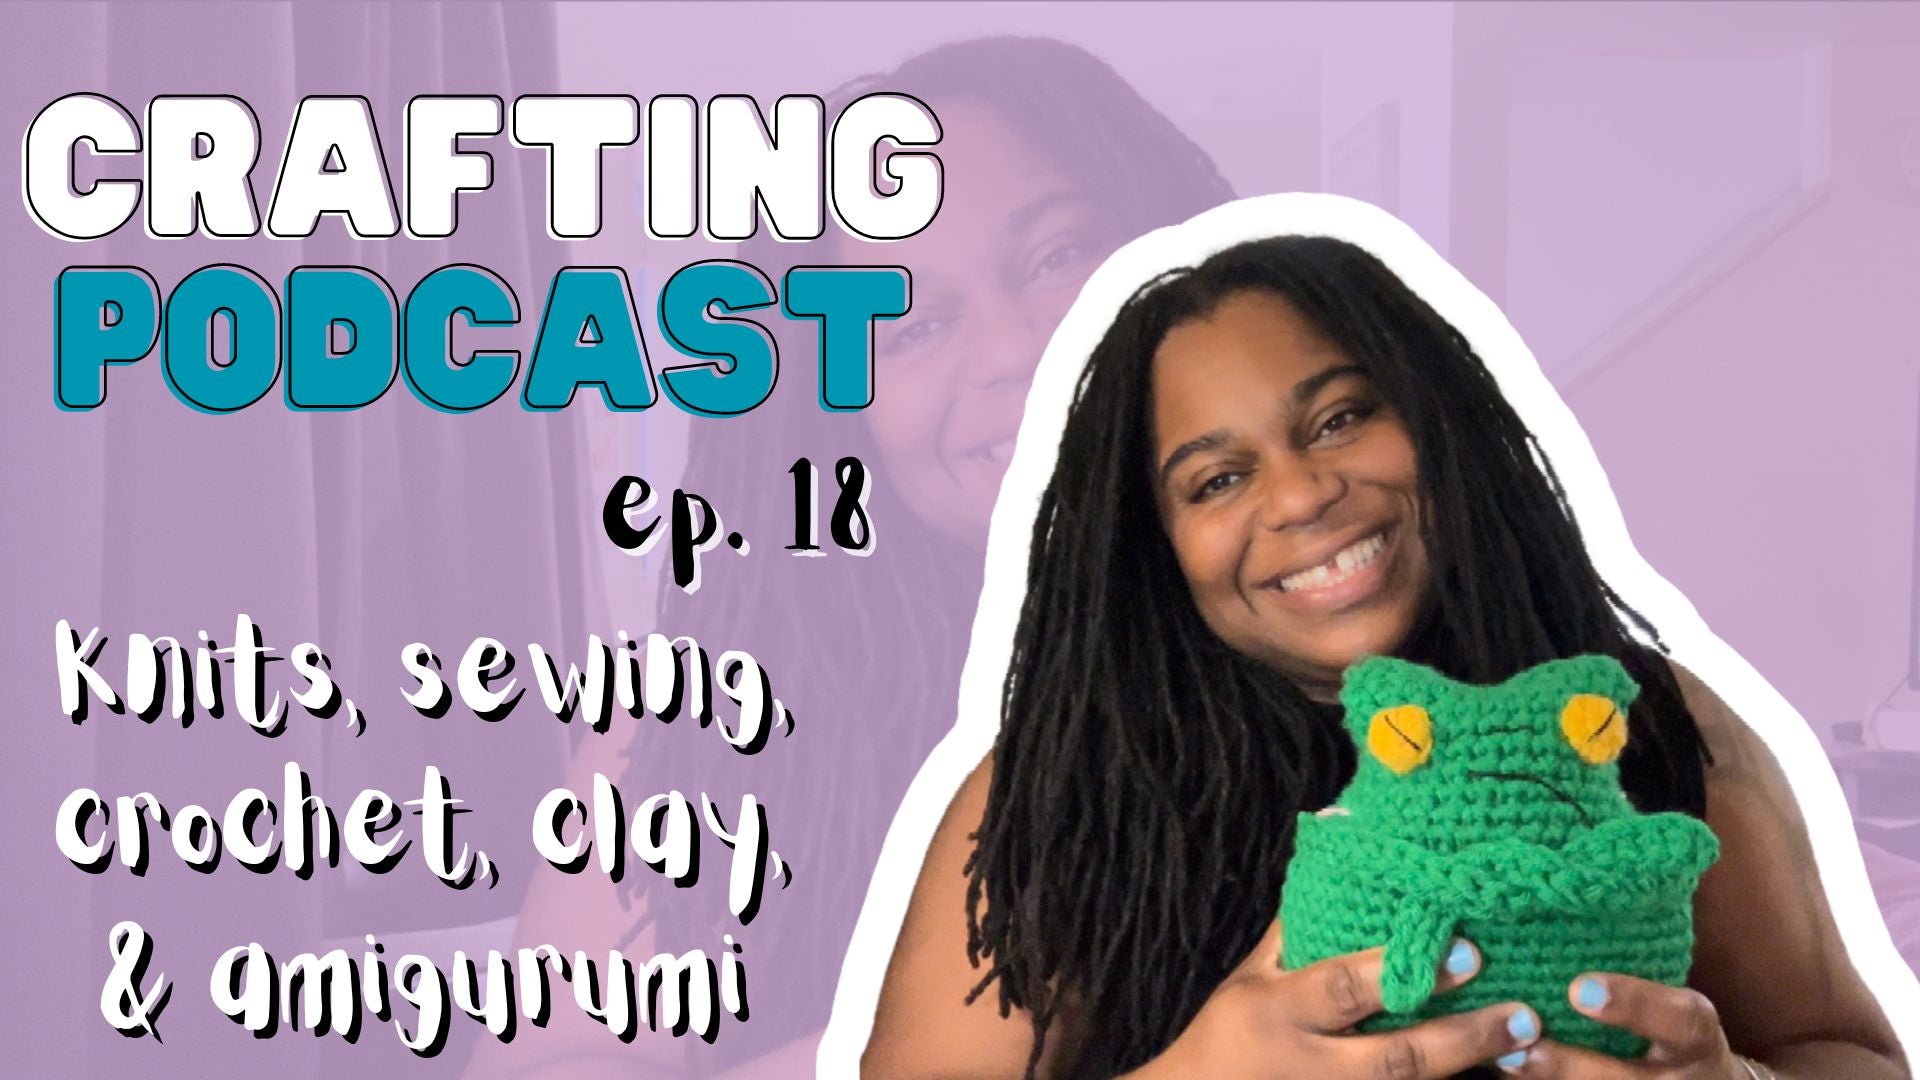 Load video: Crafting Podcast | Crochet, Sewing, &amp; Knits | Just Whit ep. 16